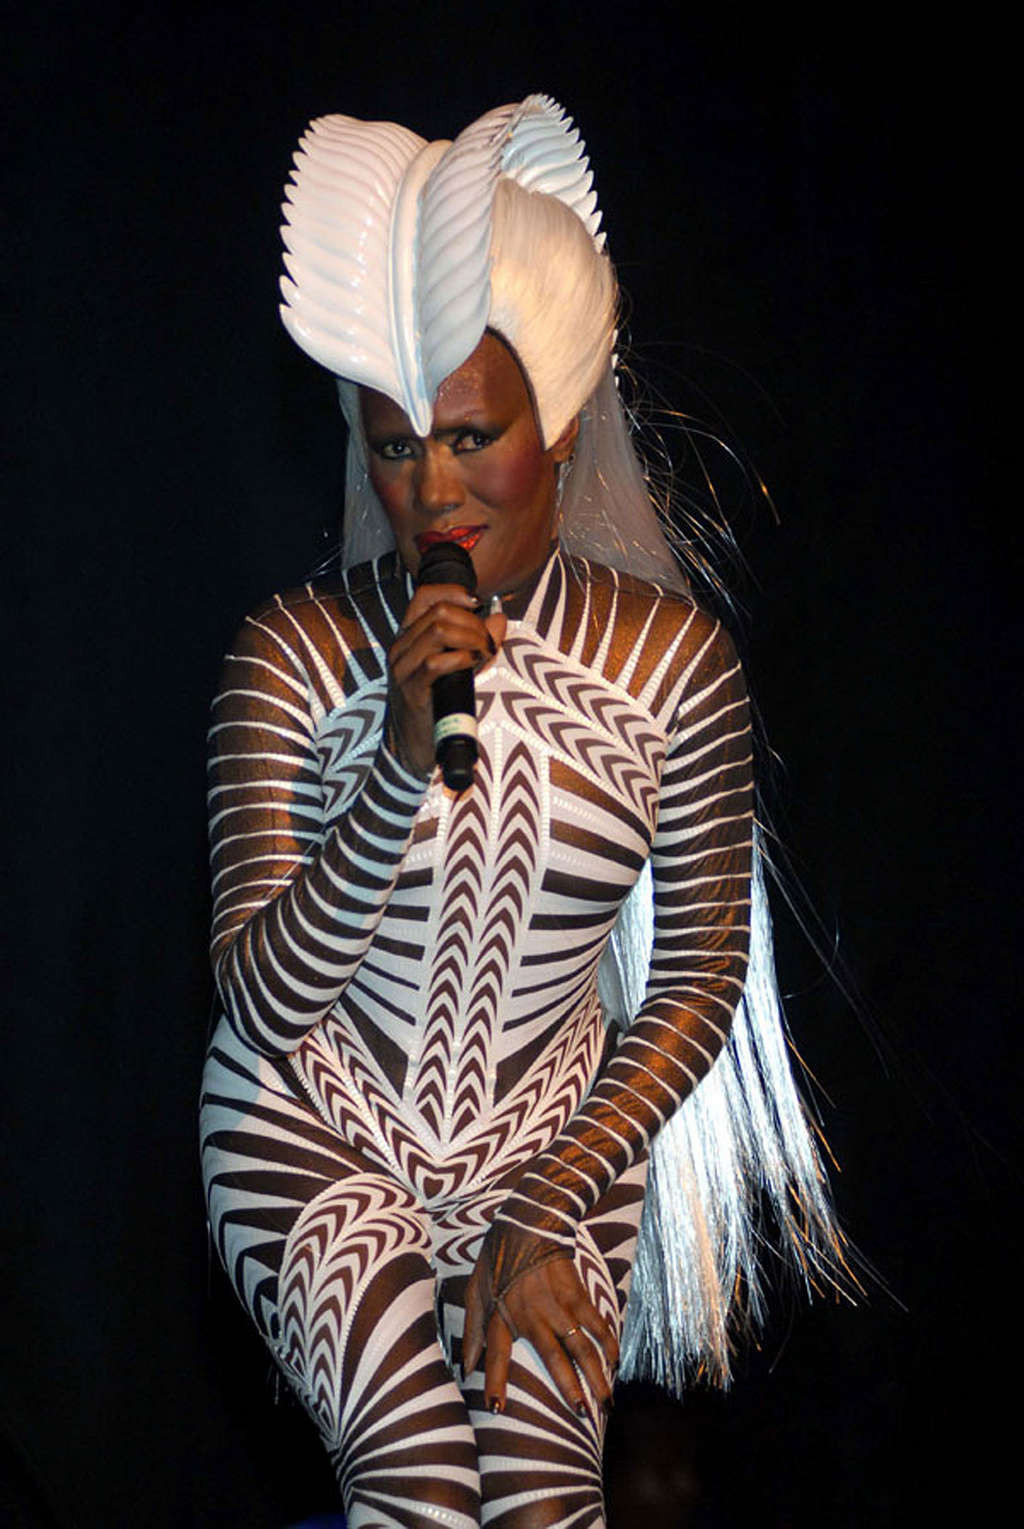 Grace Jones tits slip and upskirt on stage paparazzi pictures #75359715